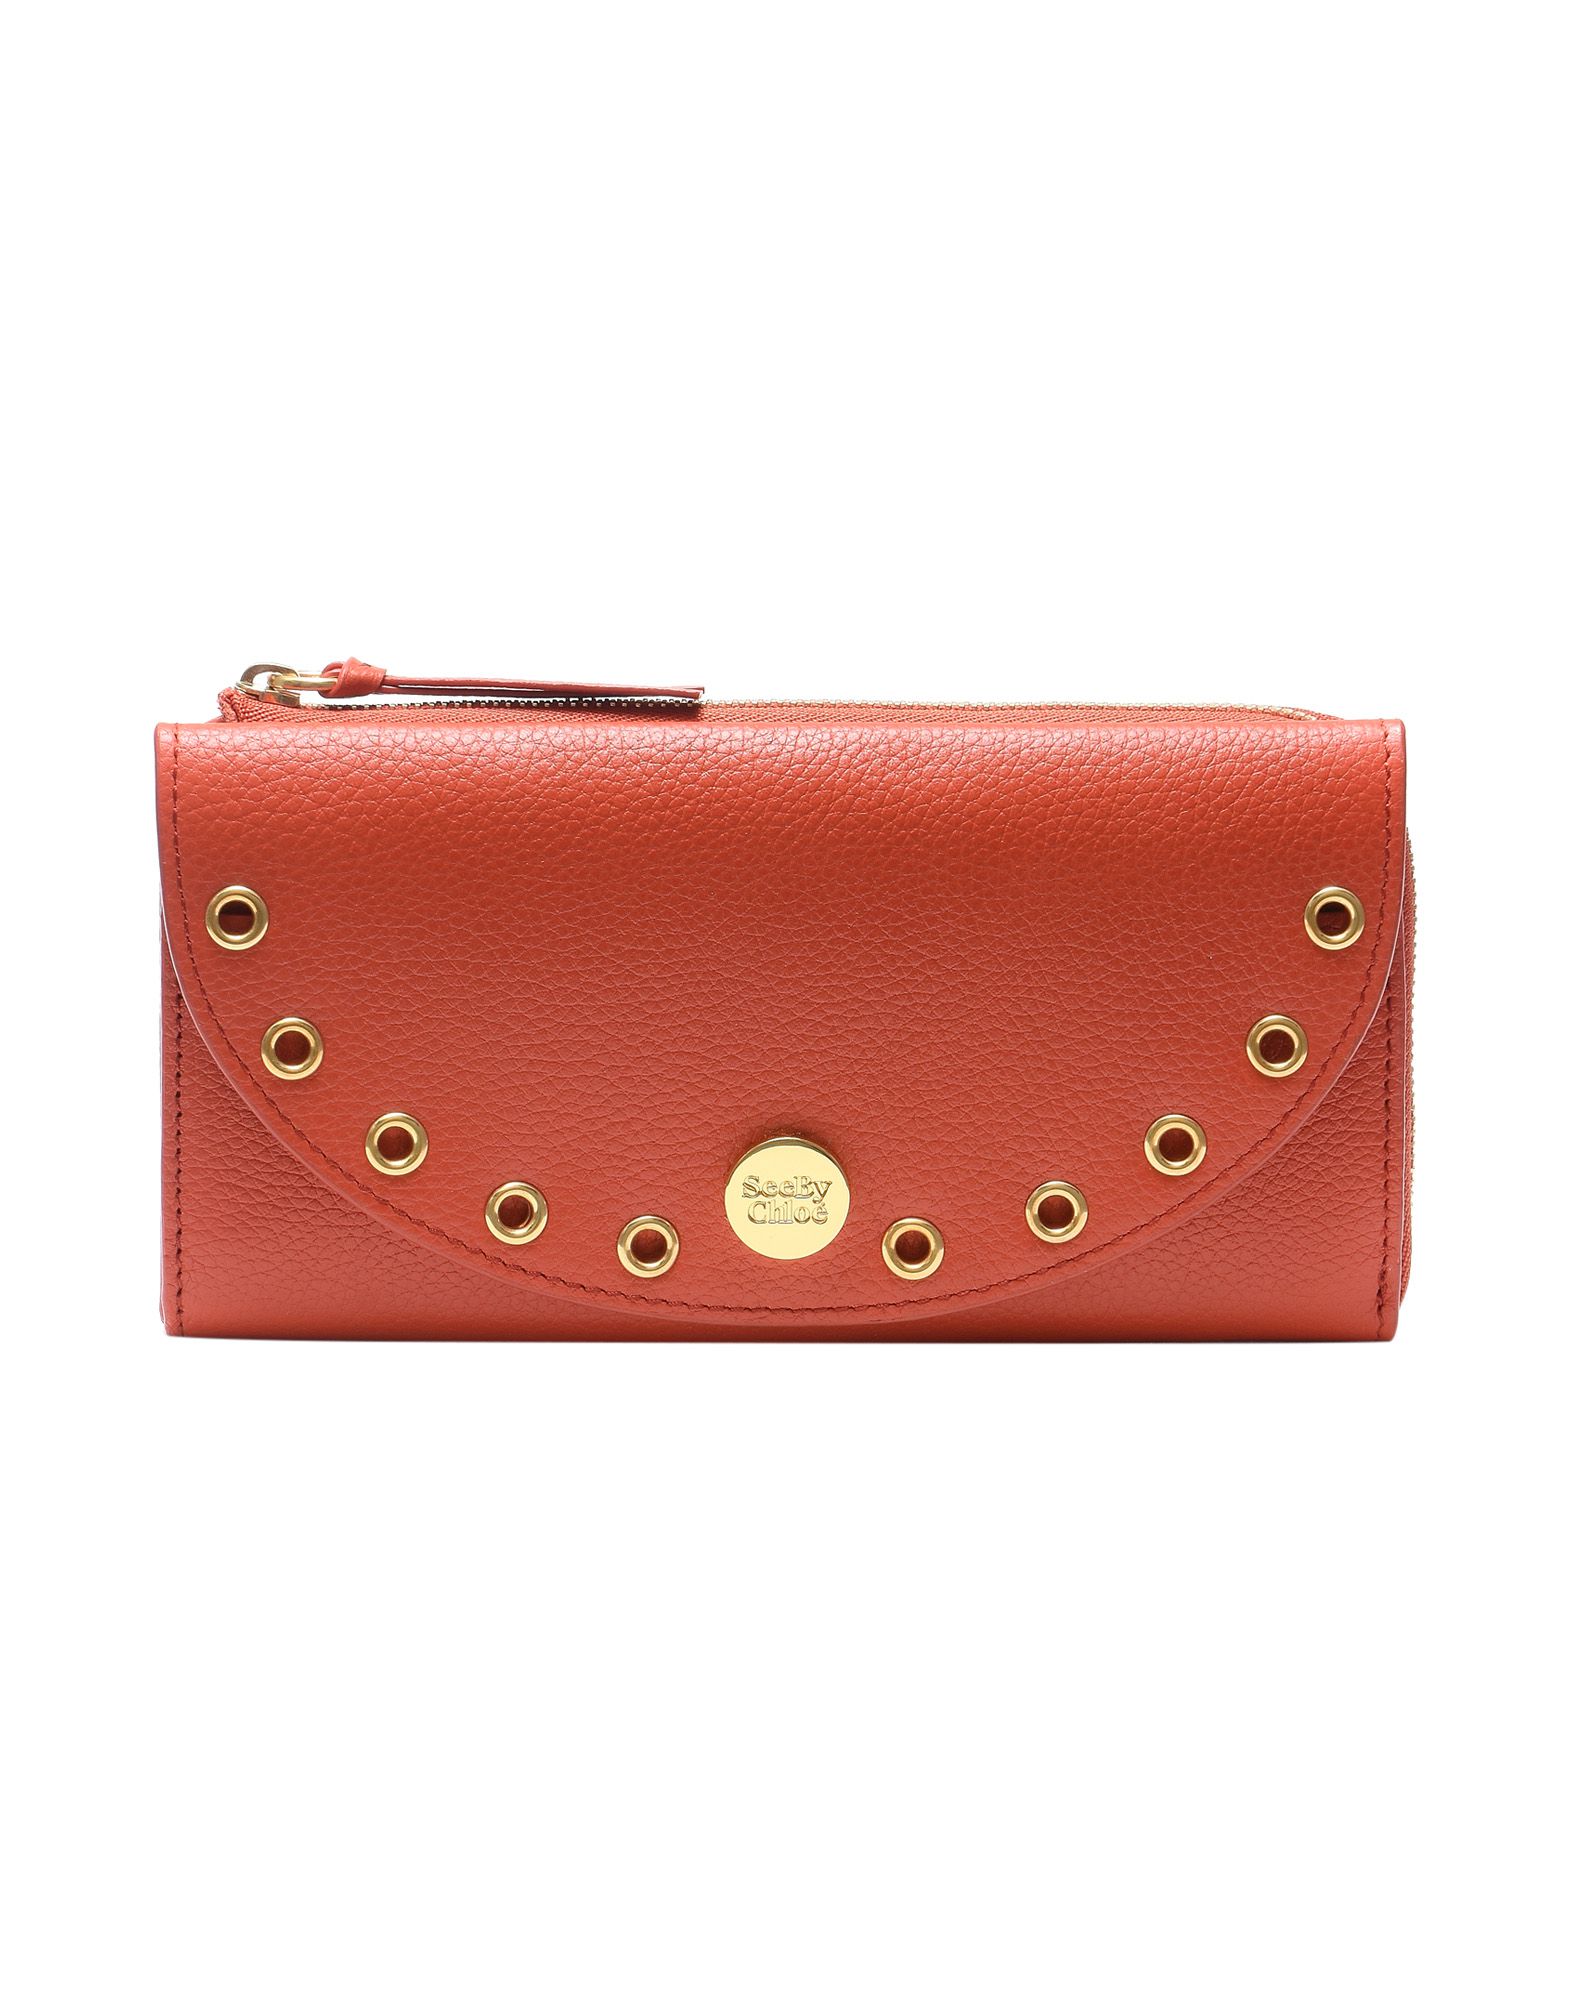 SEE BY CHLOÉ WALLETS,46594120MN 1